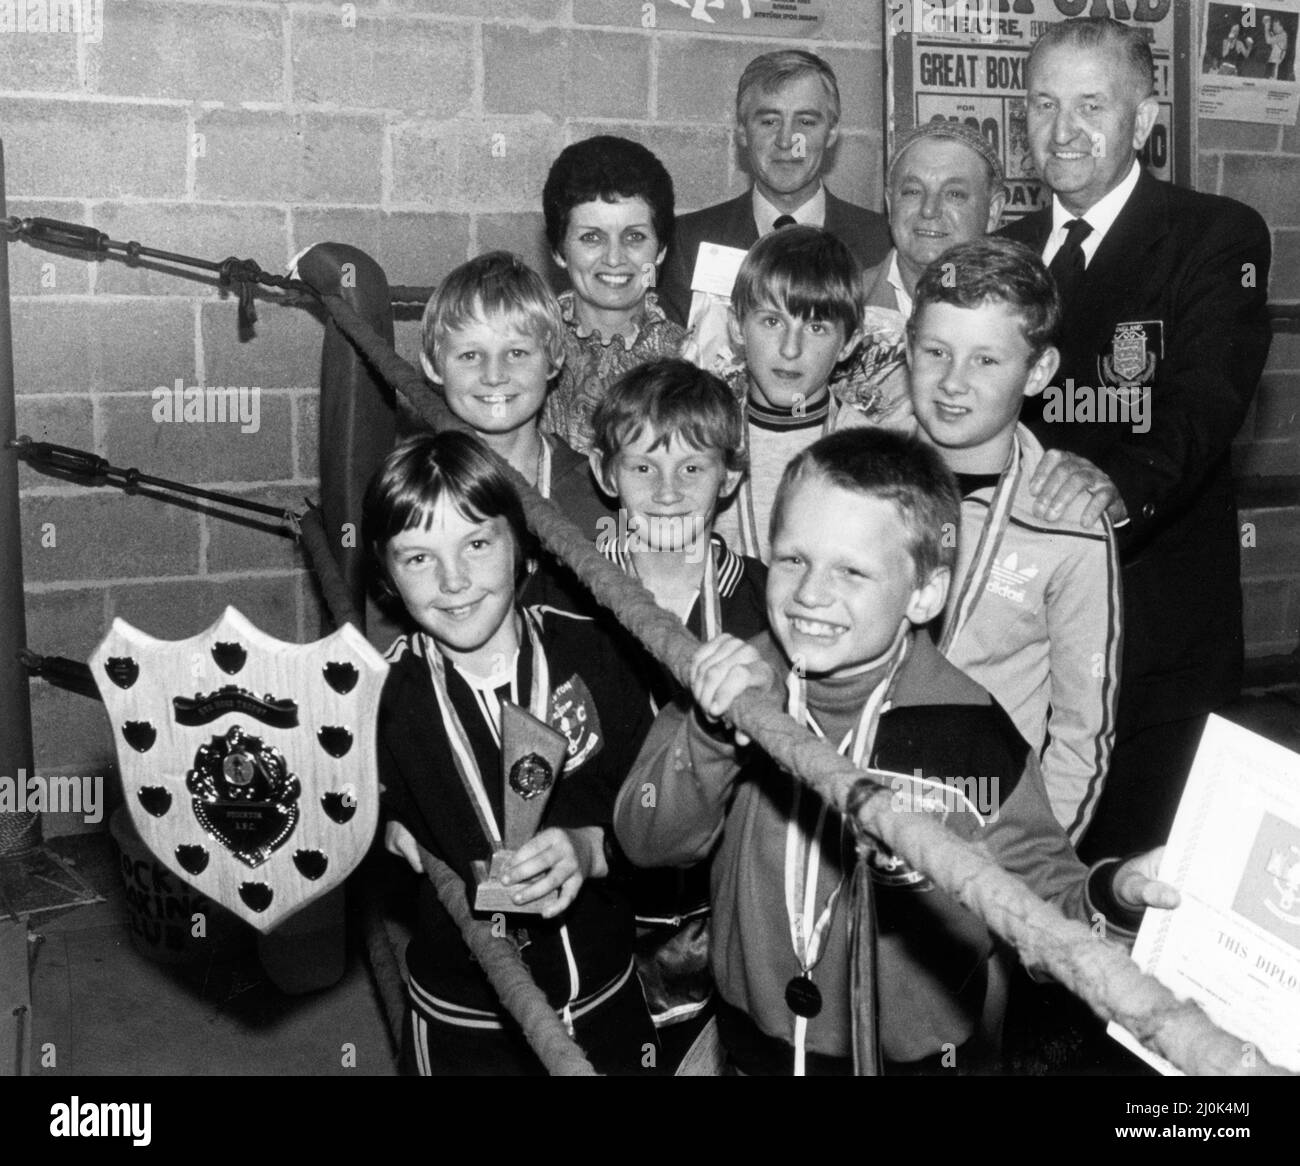 The young hopefuls of Stockton Amateur Boxing Club, 1st October 1982. Left to Right, John Rooney, Craig Watson, Martin McConnell, Mark Brown, Darren Smith and Glen Stephenson pictured with (l-r) Marion Hogg, Sid Hogg, Bill Harper (trainer) and Phil Thomas, North eastern Counties ABA life vice president, at presentation night/ after completing special diploma course. Stock Photo